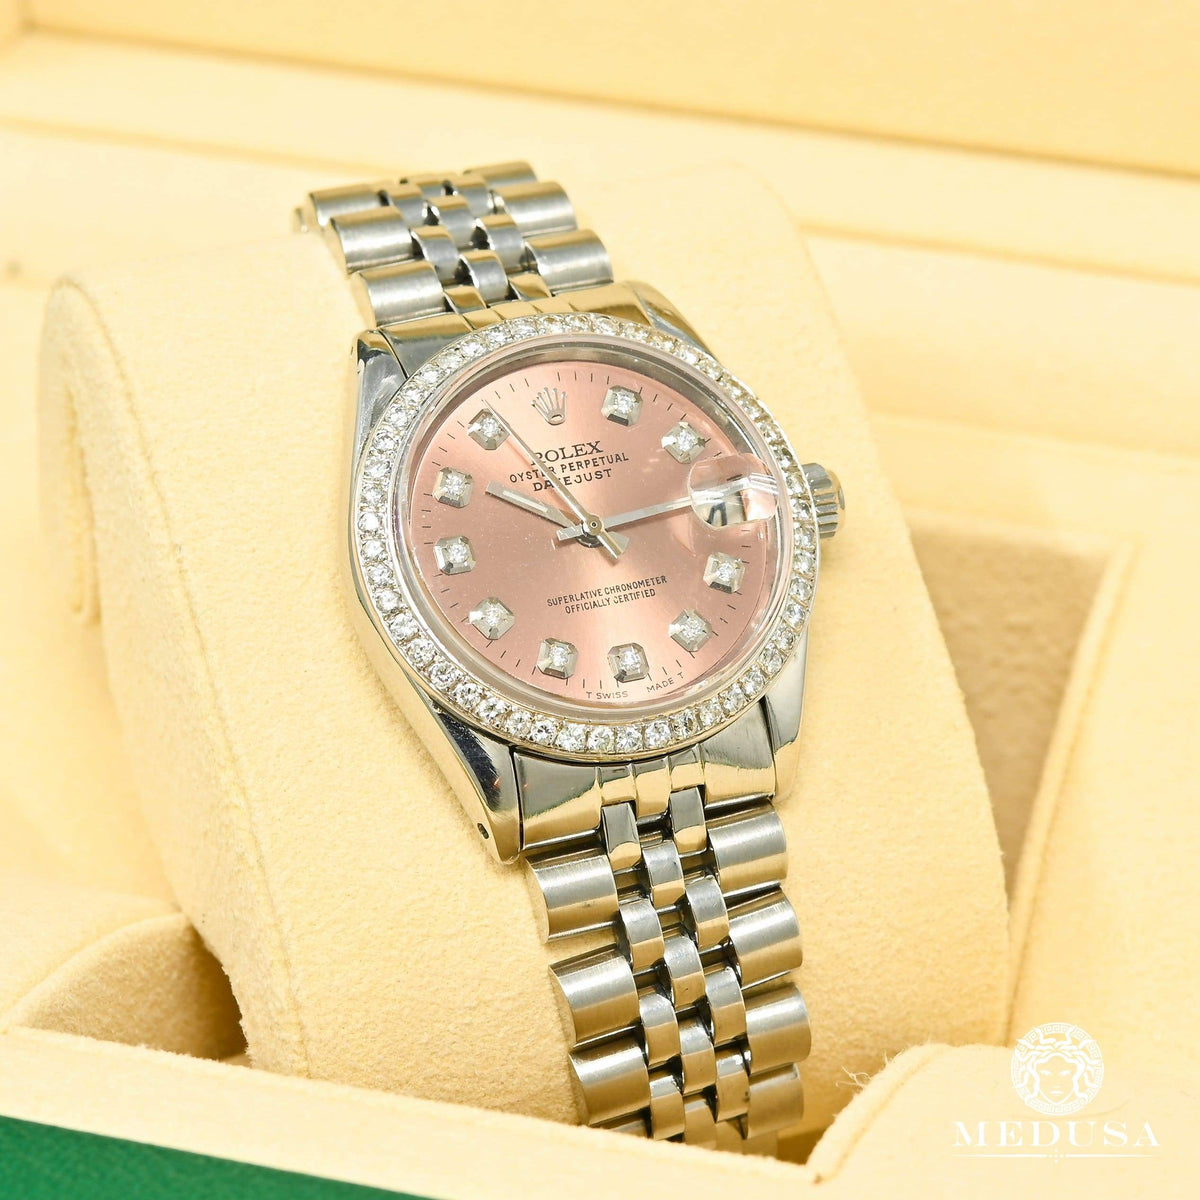 Montre Rolex | Montre Femme Rolex Datejust 31mm - Chocolate Stainless Stainless